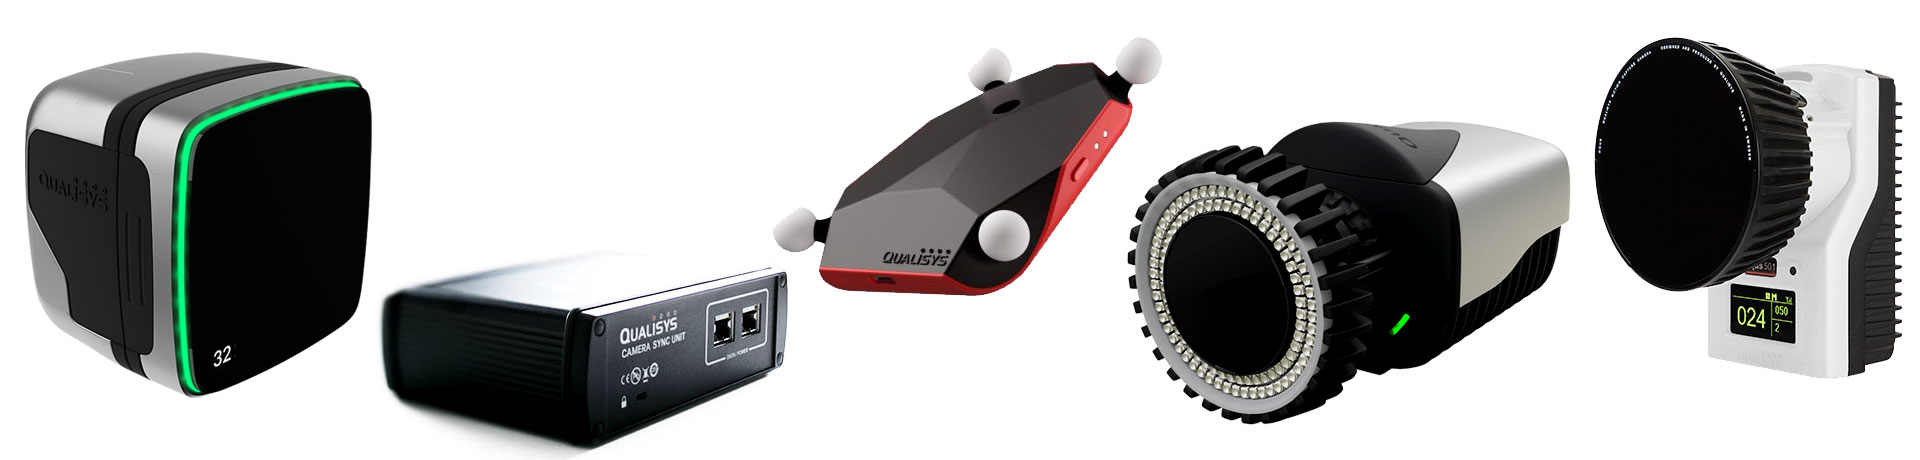 Selection of Products from Qualisys Underwater MOCAP Systems